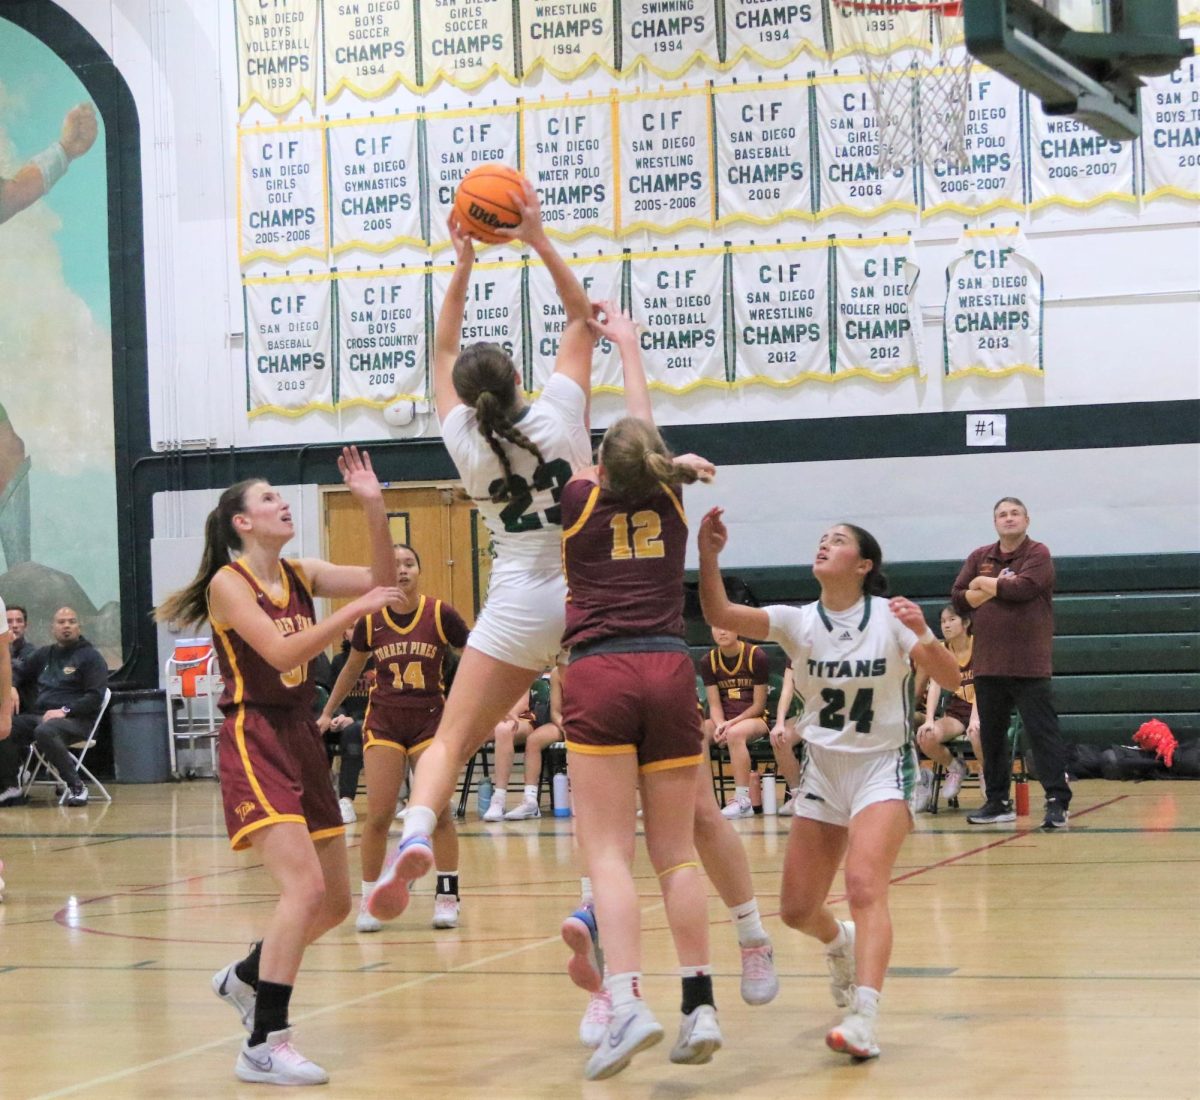 Going+for+the+basket%3A+Junior+Katelyn+Johnson+leaps+to+put+the+ball+through+the+hoop%2C+during+a+home+game+against+Torrey+Pines+Dec.+12%2C+as+her+senior+teammate+Teya+White+waits+to+catch+a+potential+rebound.